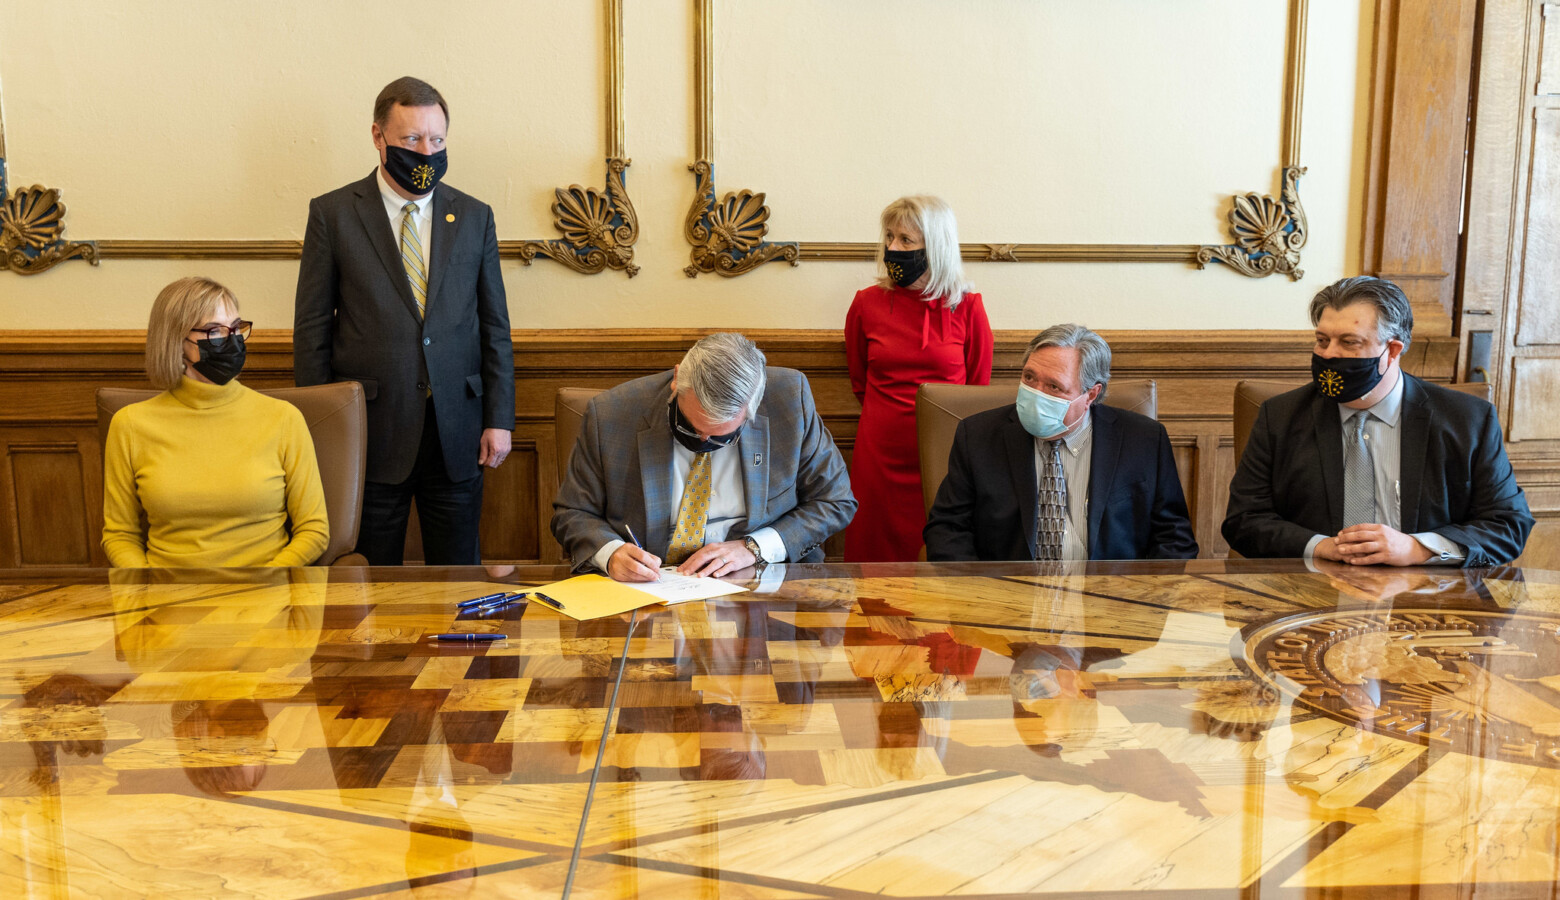 Gov. Eric Holcomb signed Senate Bill 1 into law Thursday. It will give businesses, schools, health care providers and others protections from COVID-19 civil lawsuits. (Governor Eric Holcomb/Flickr)